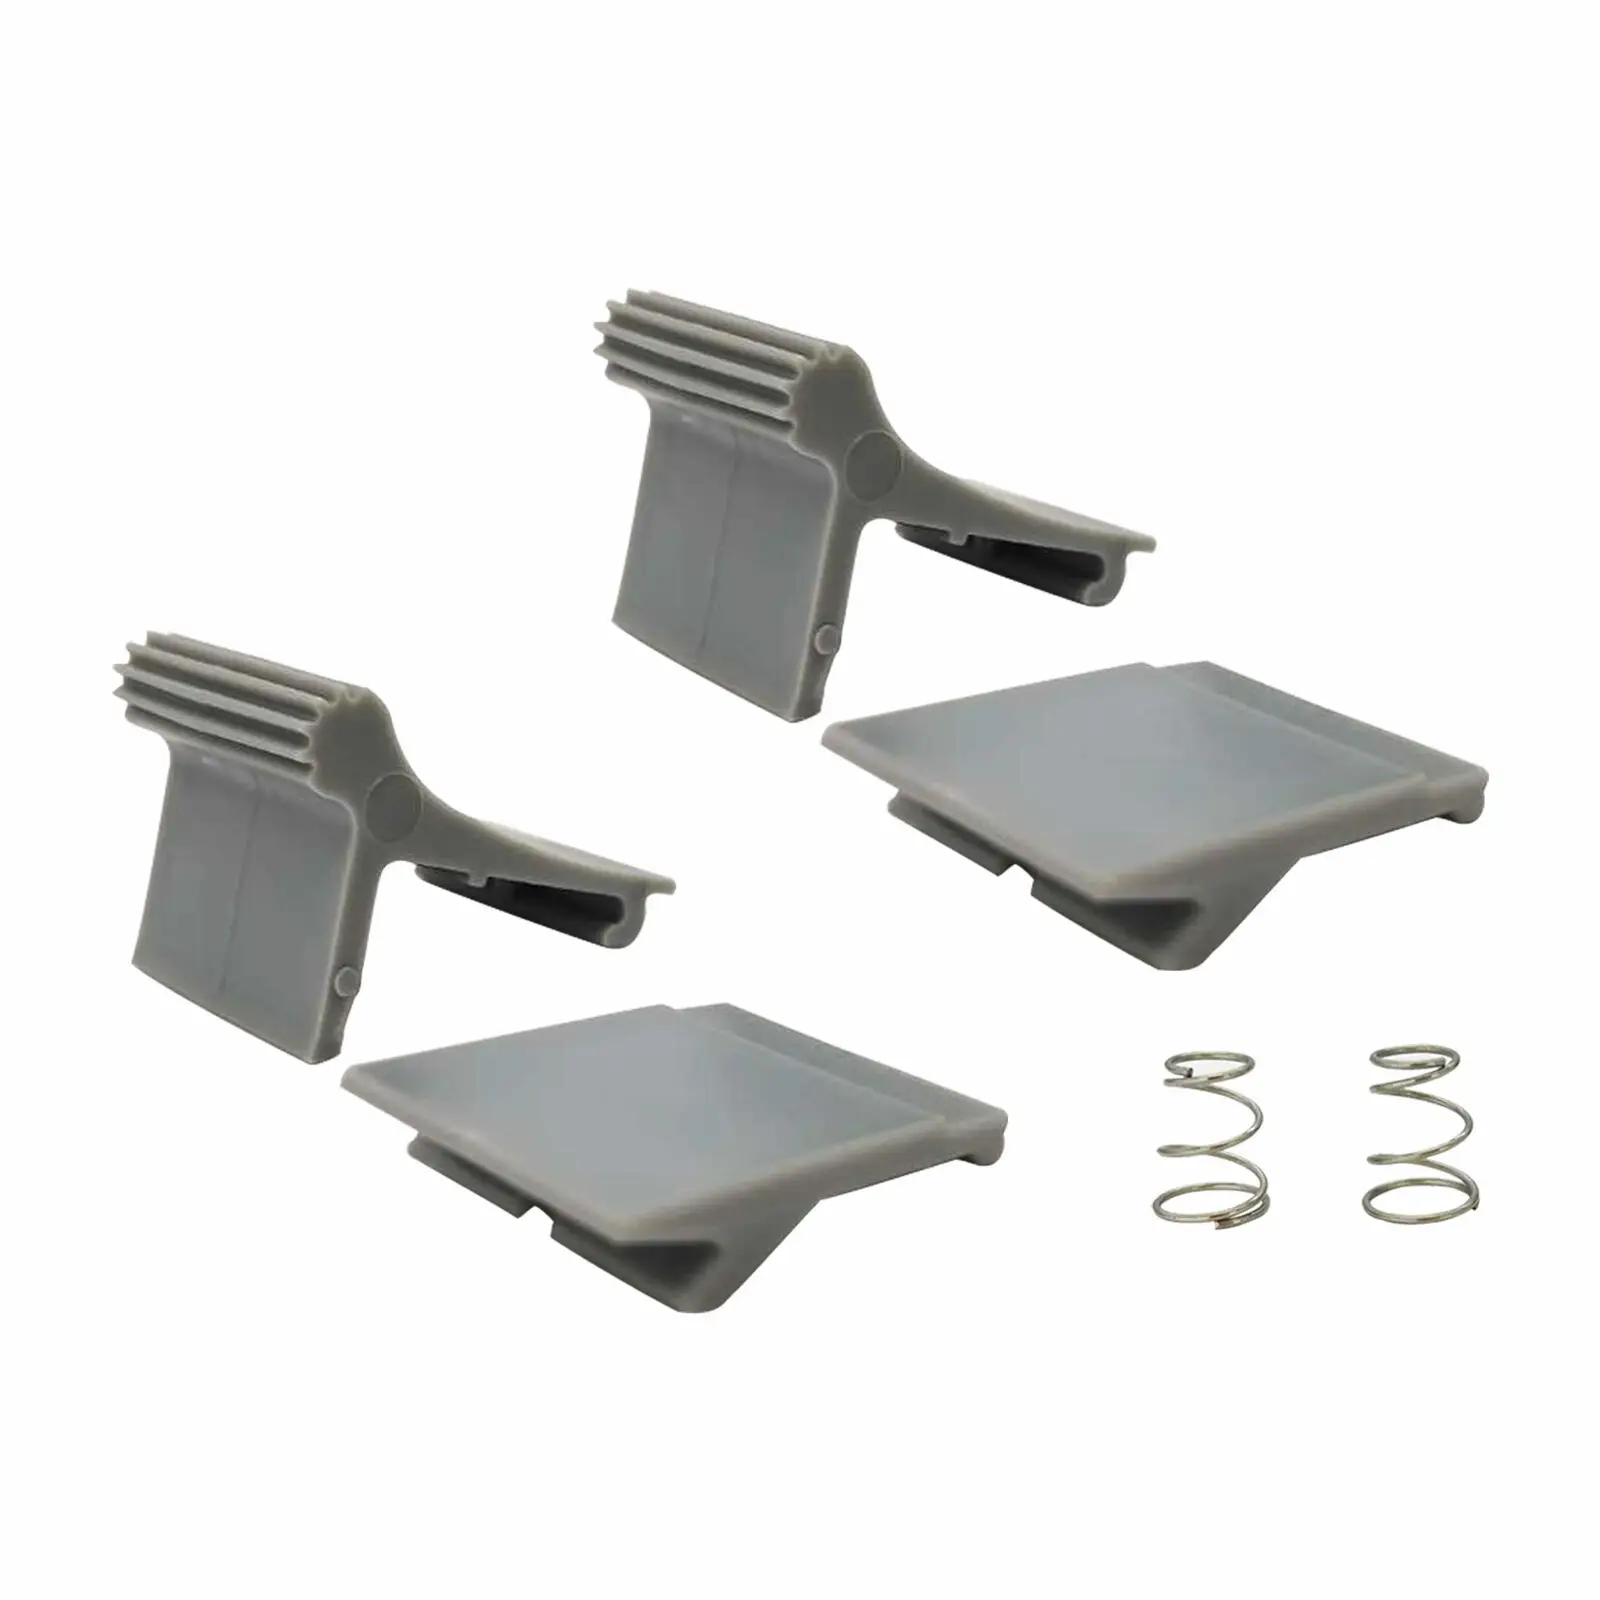 830472P002 RV Patio Awning Slider Catch patio retractable side awning 140 x 300 cm grey